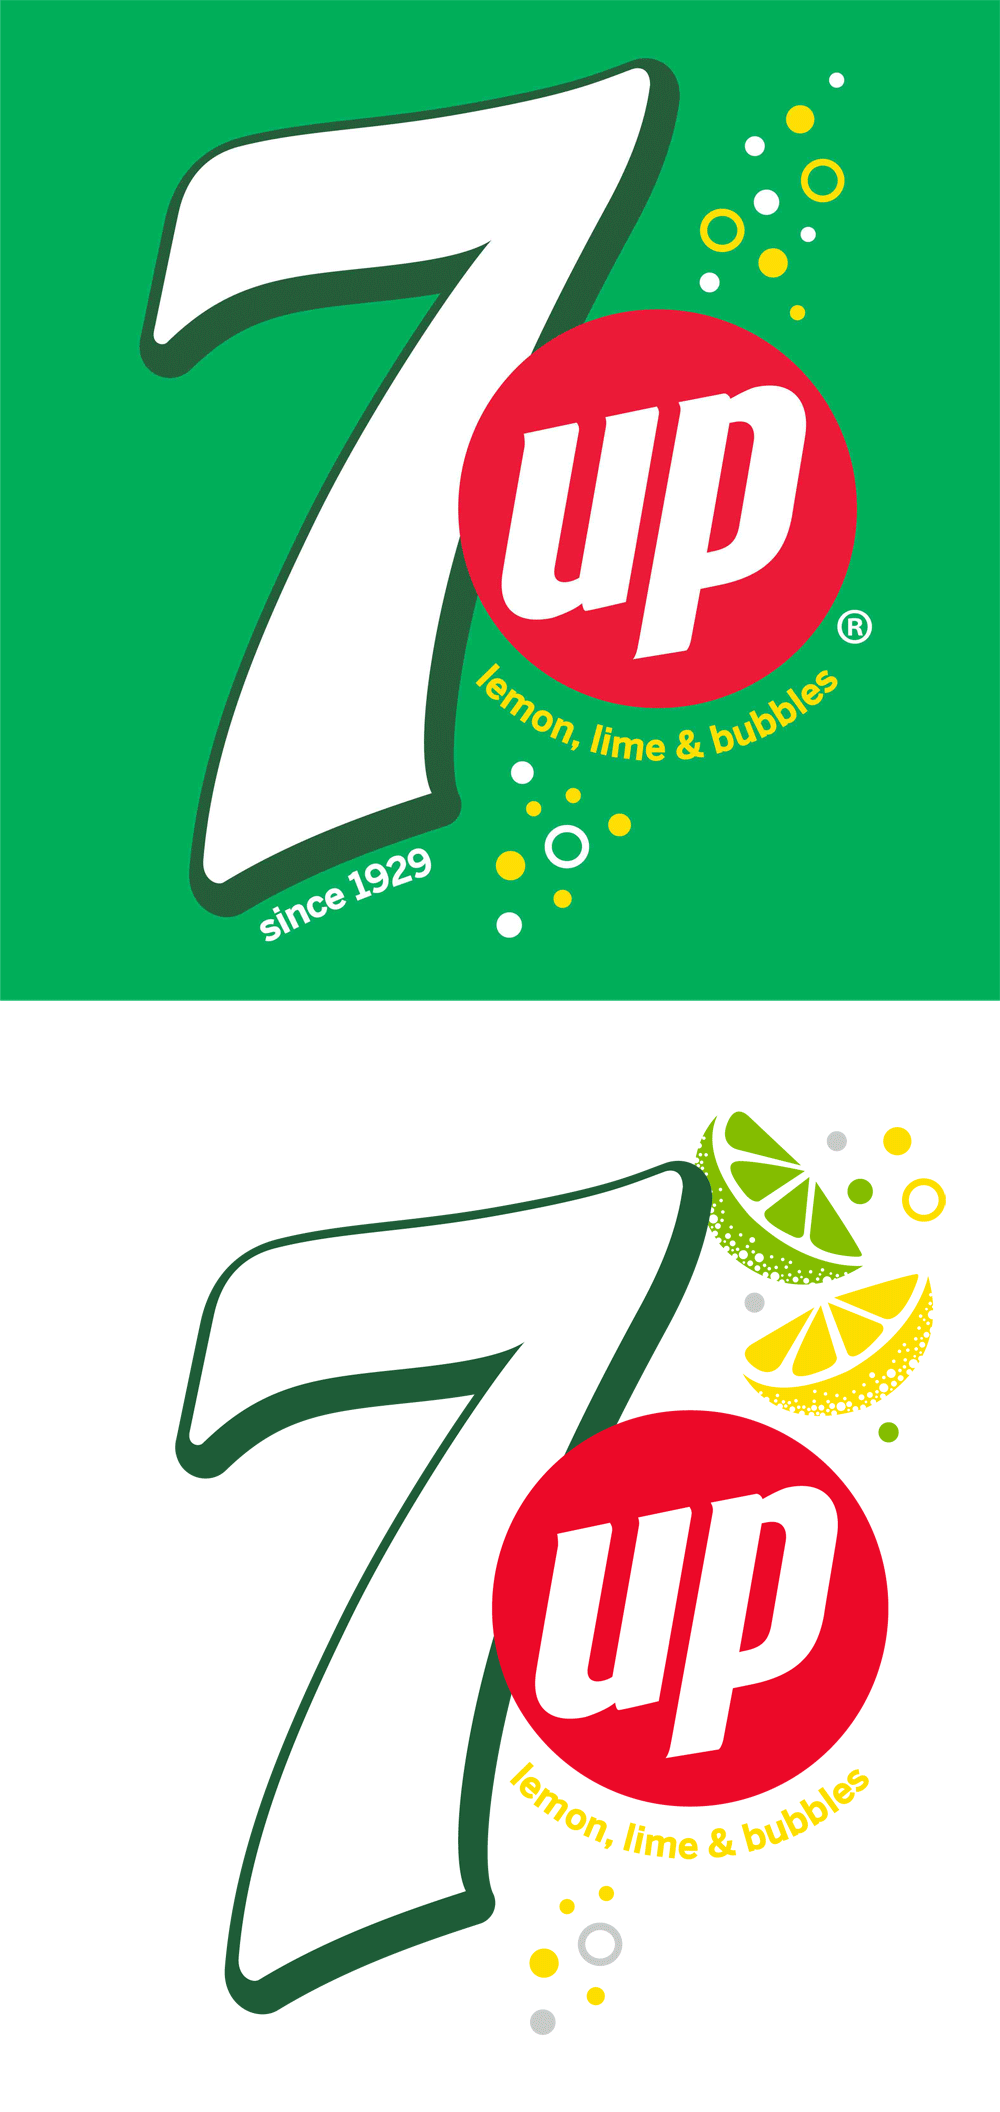 Pepsi 2017 Logo - Brand New: New Logo and Packaging for PepsiCo's 7up